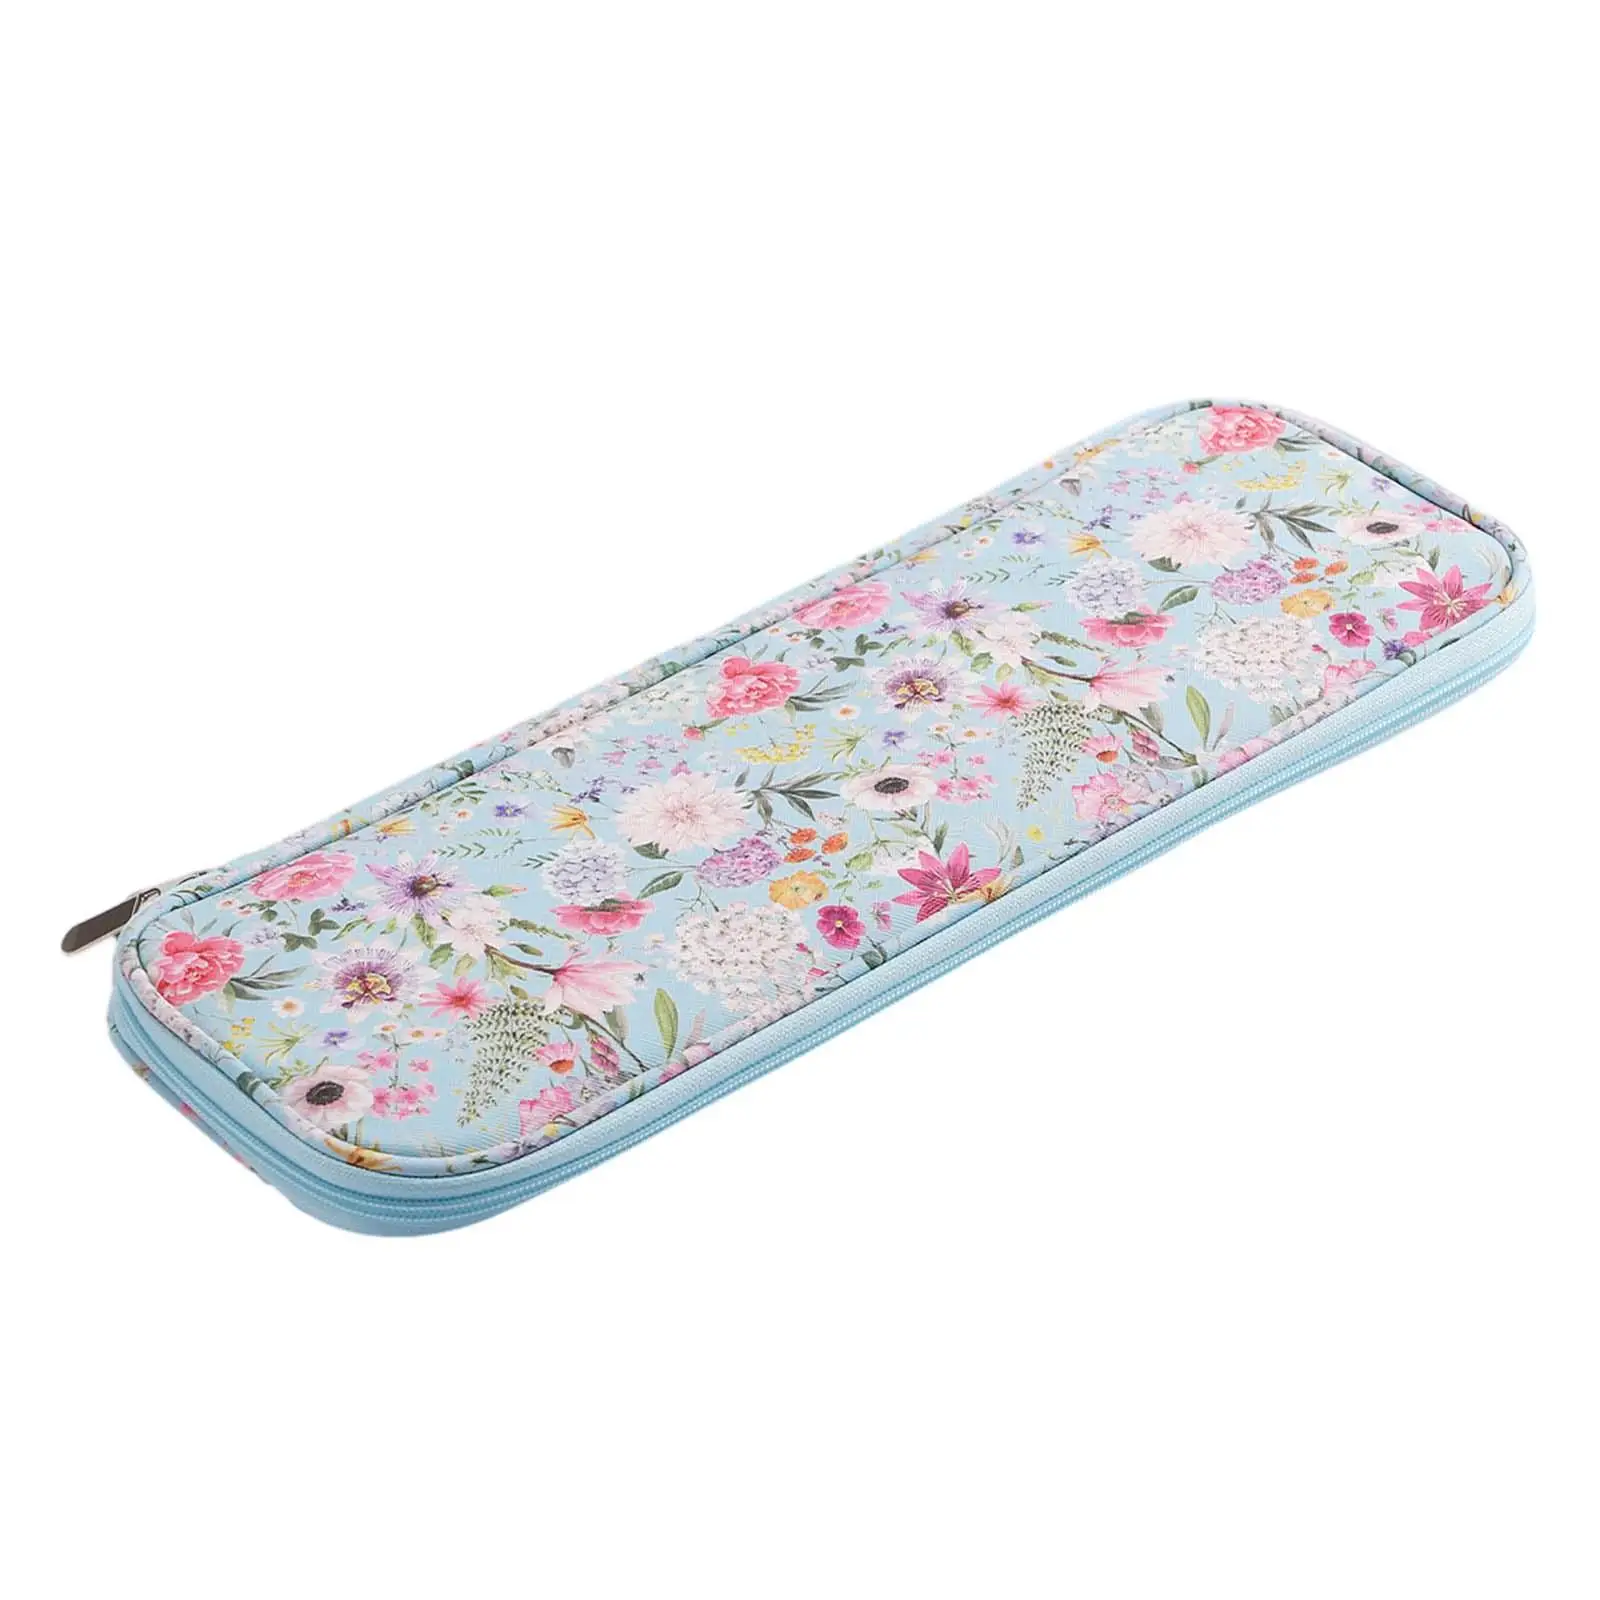 Crochet Hooks Storage Bag Compact Sturdy Airport, Park, Train, Boat, Home Knitting Multifunctional Multiple Internal Pockets